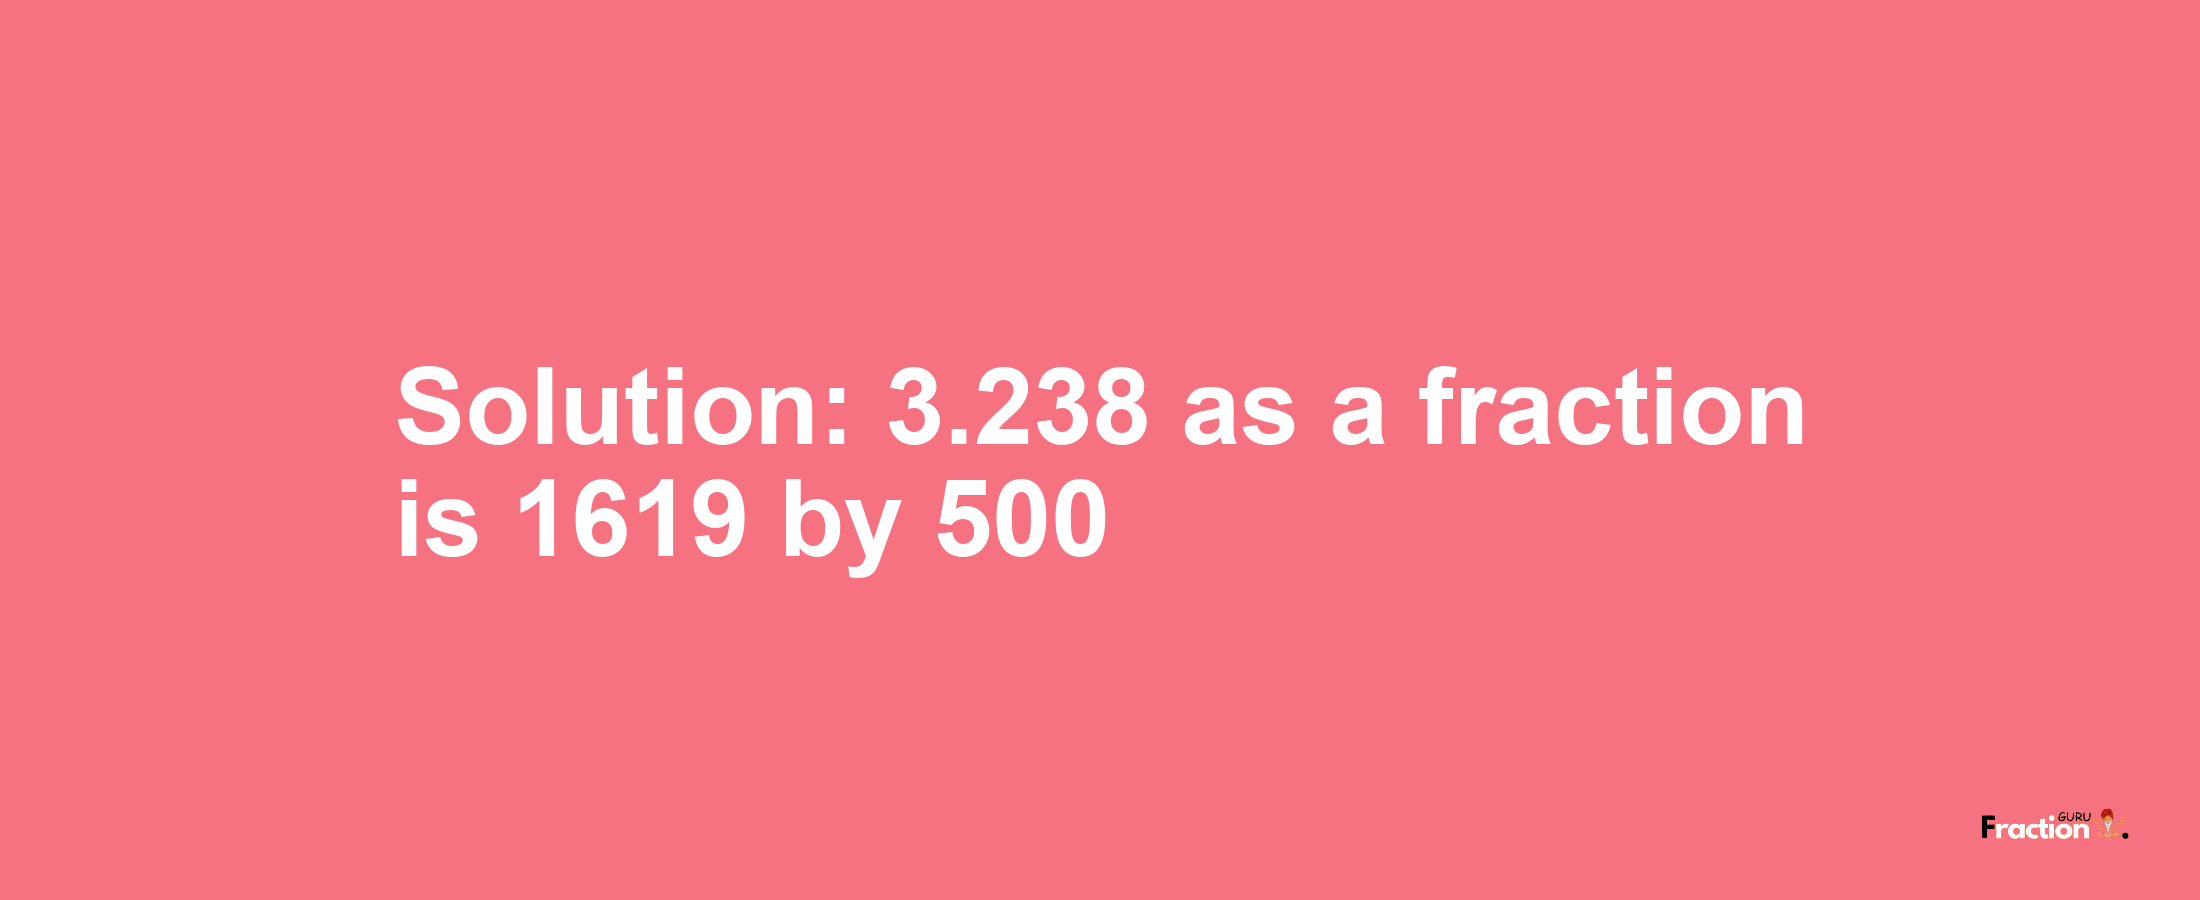 Solution:3.238 as a fraction is 1619/500